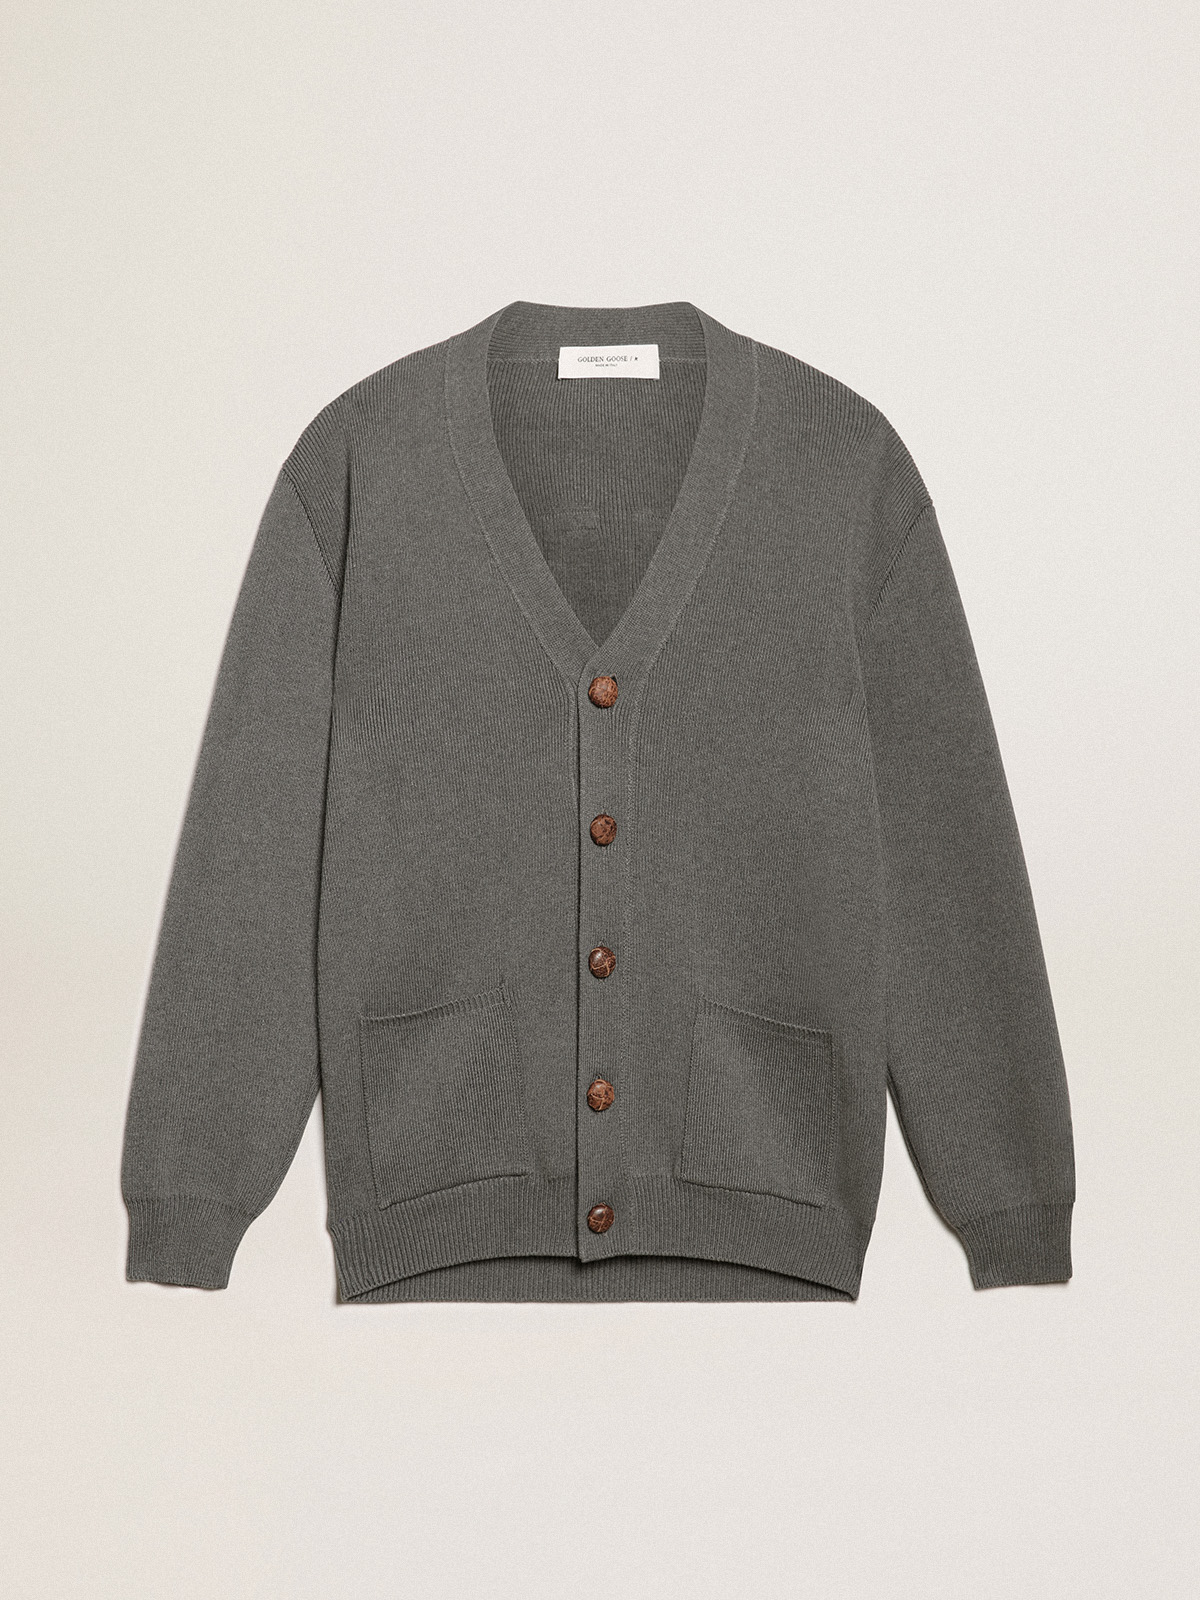 Women's grey cotton cardigan with buttons | Golden Goose